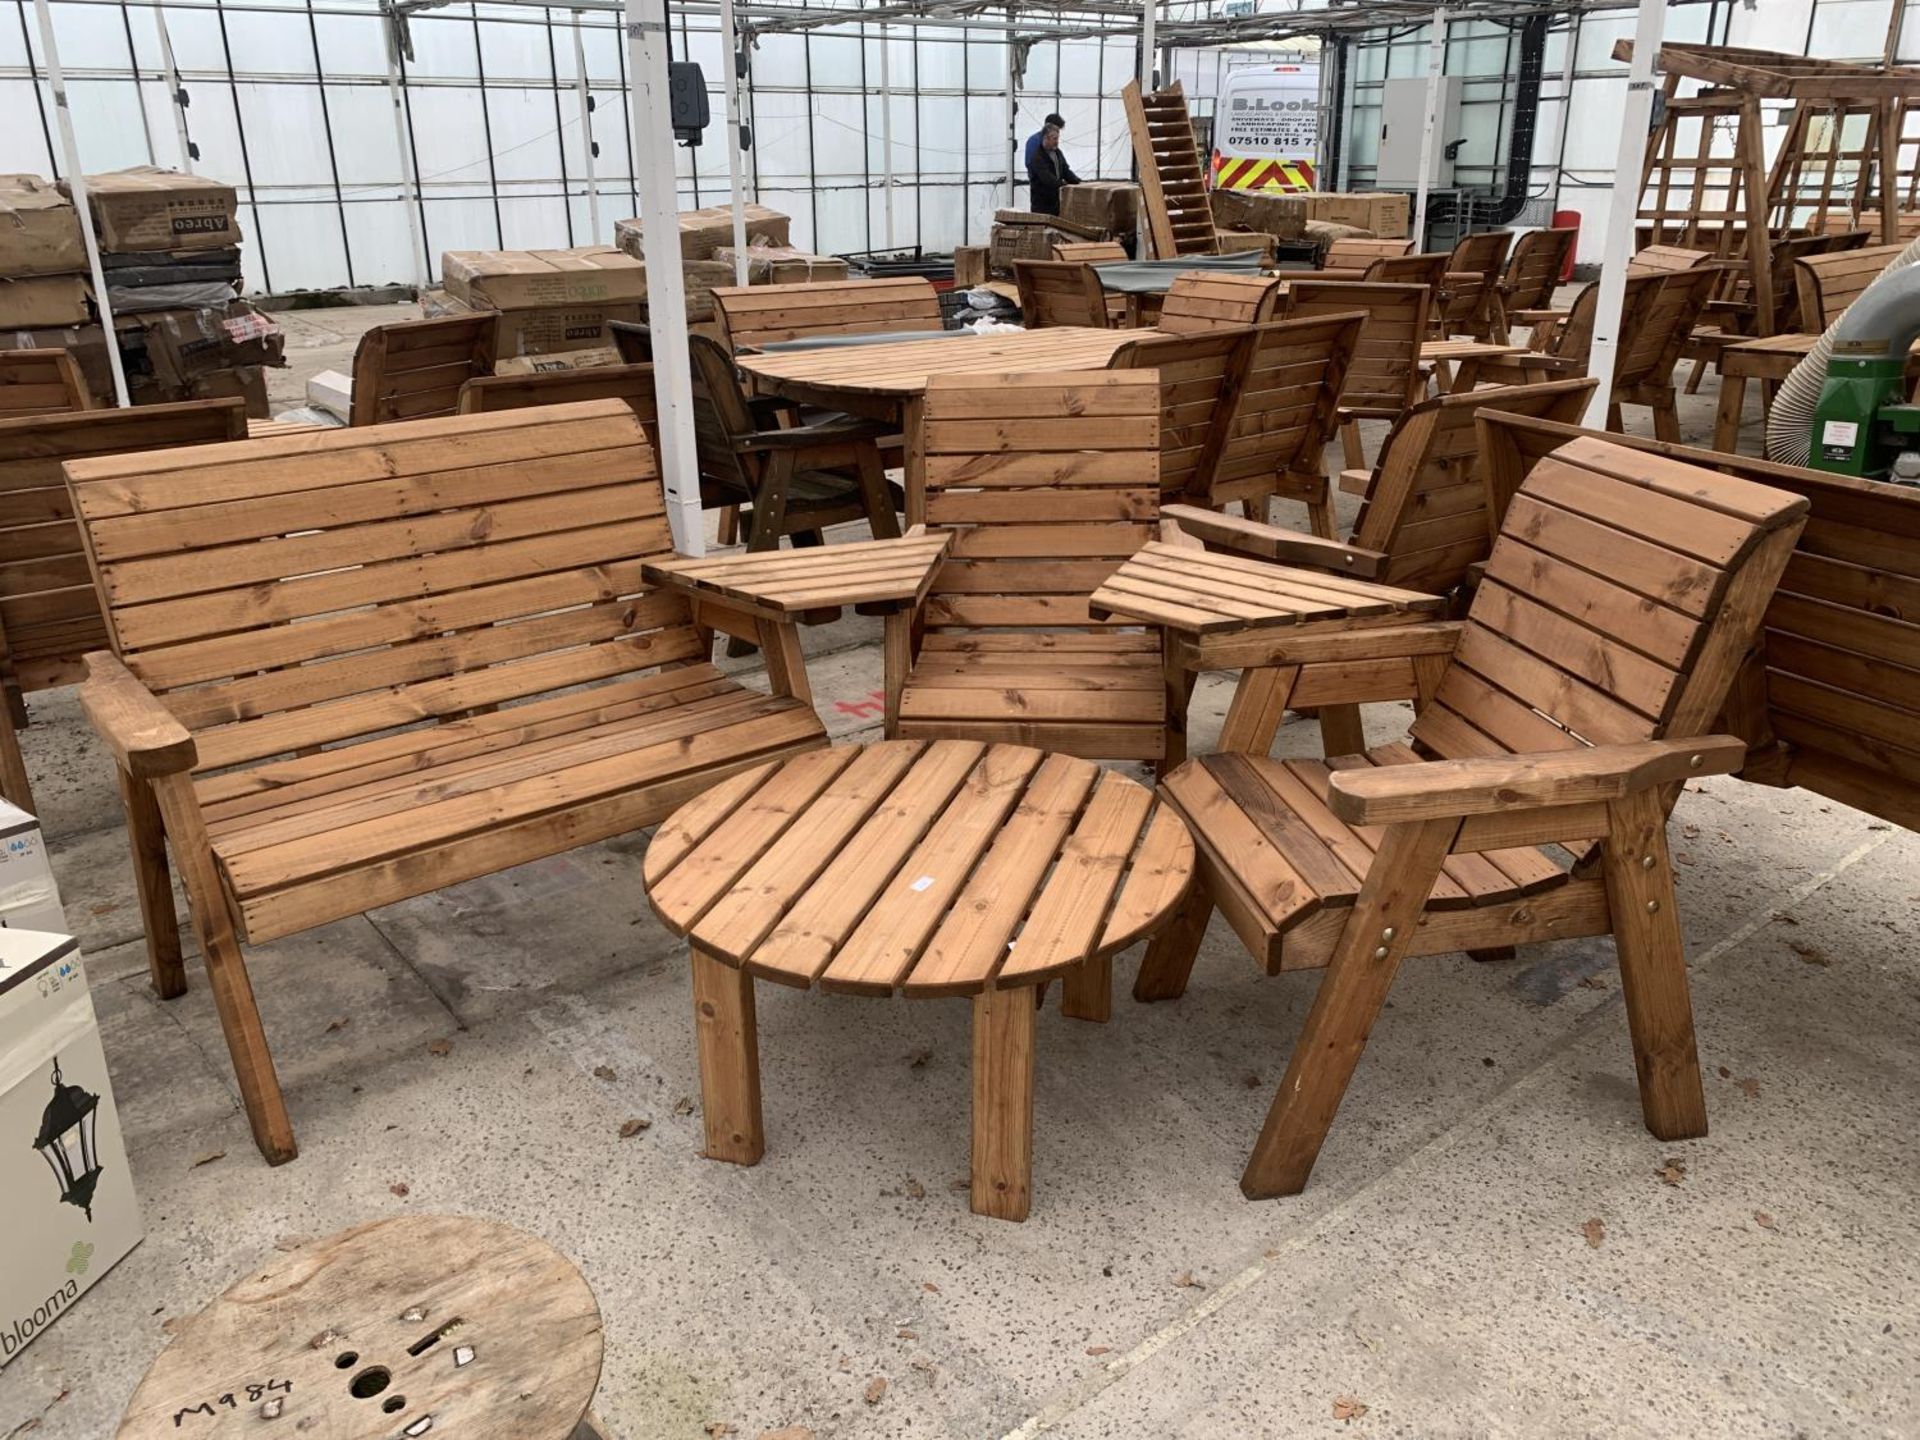 AN AS NEW EX DISPLAY CHARLES TAYLOR GARDEN FURNITURE SET TO INCLUDE A TWO SEATER BENCH, TWO CHAIRS